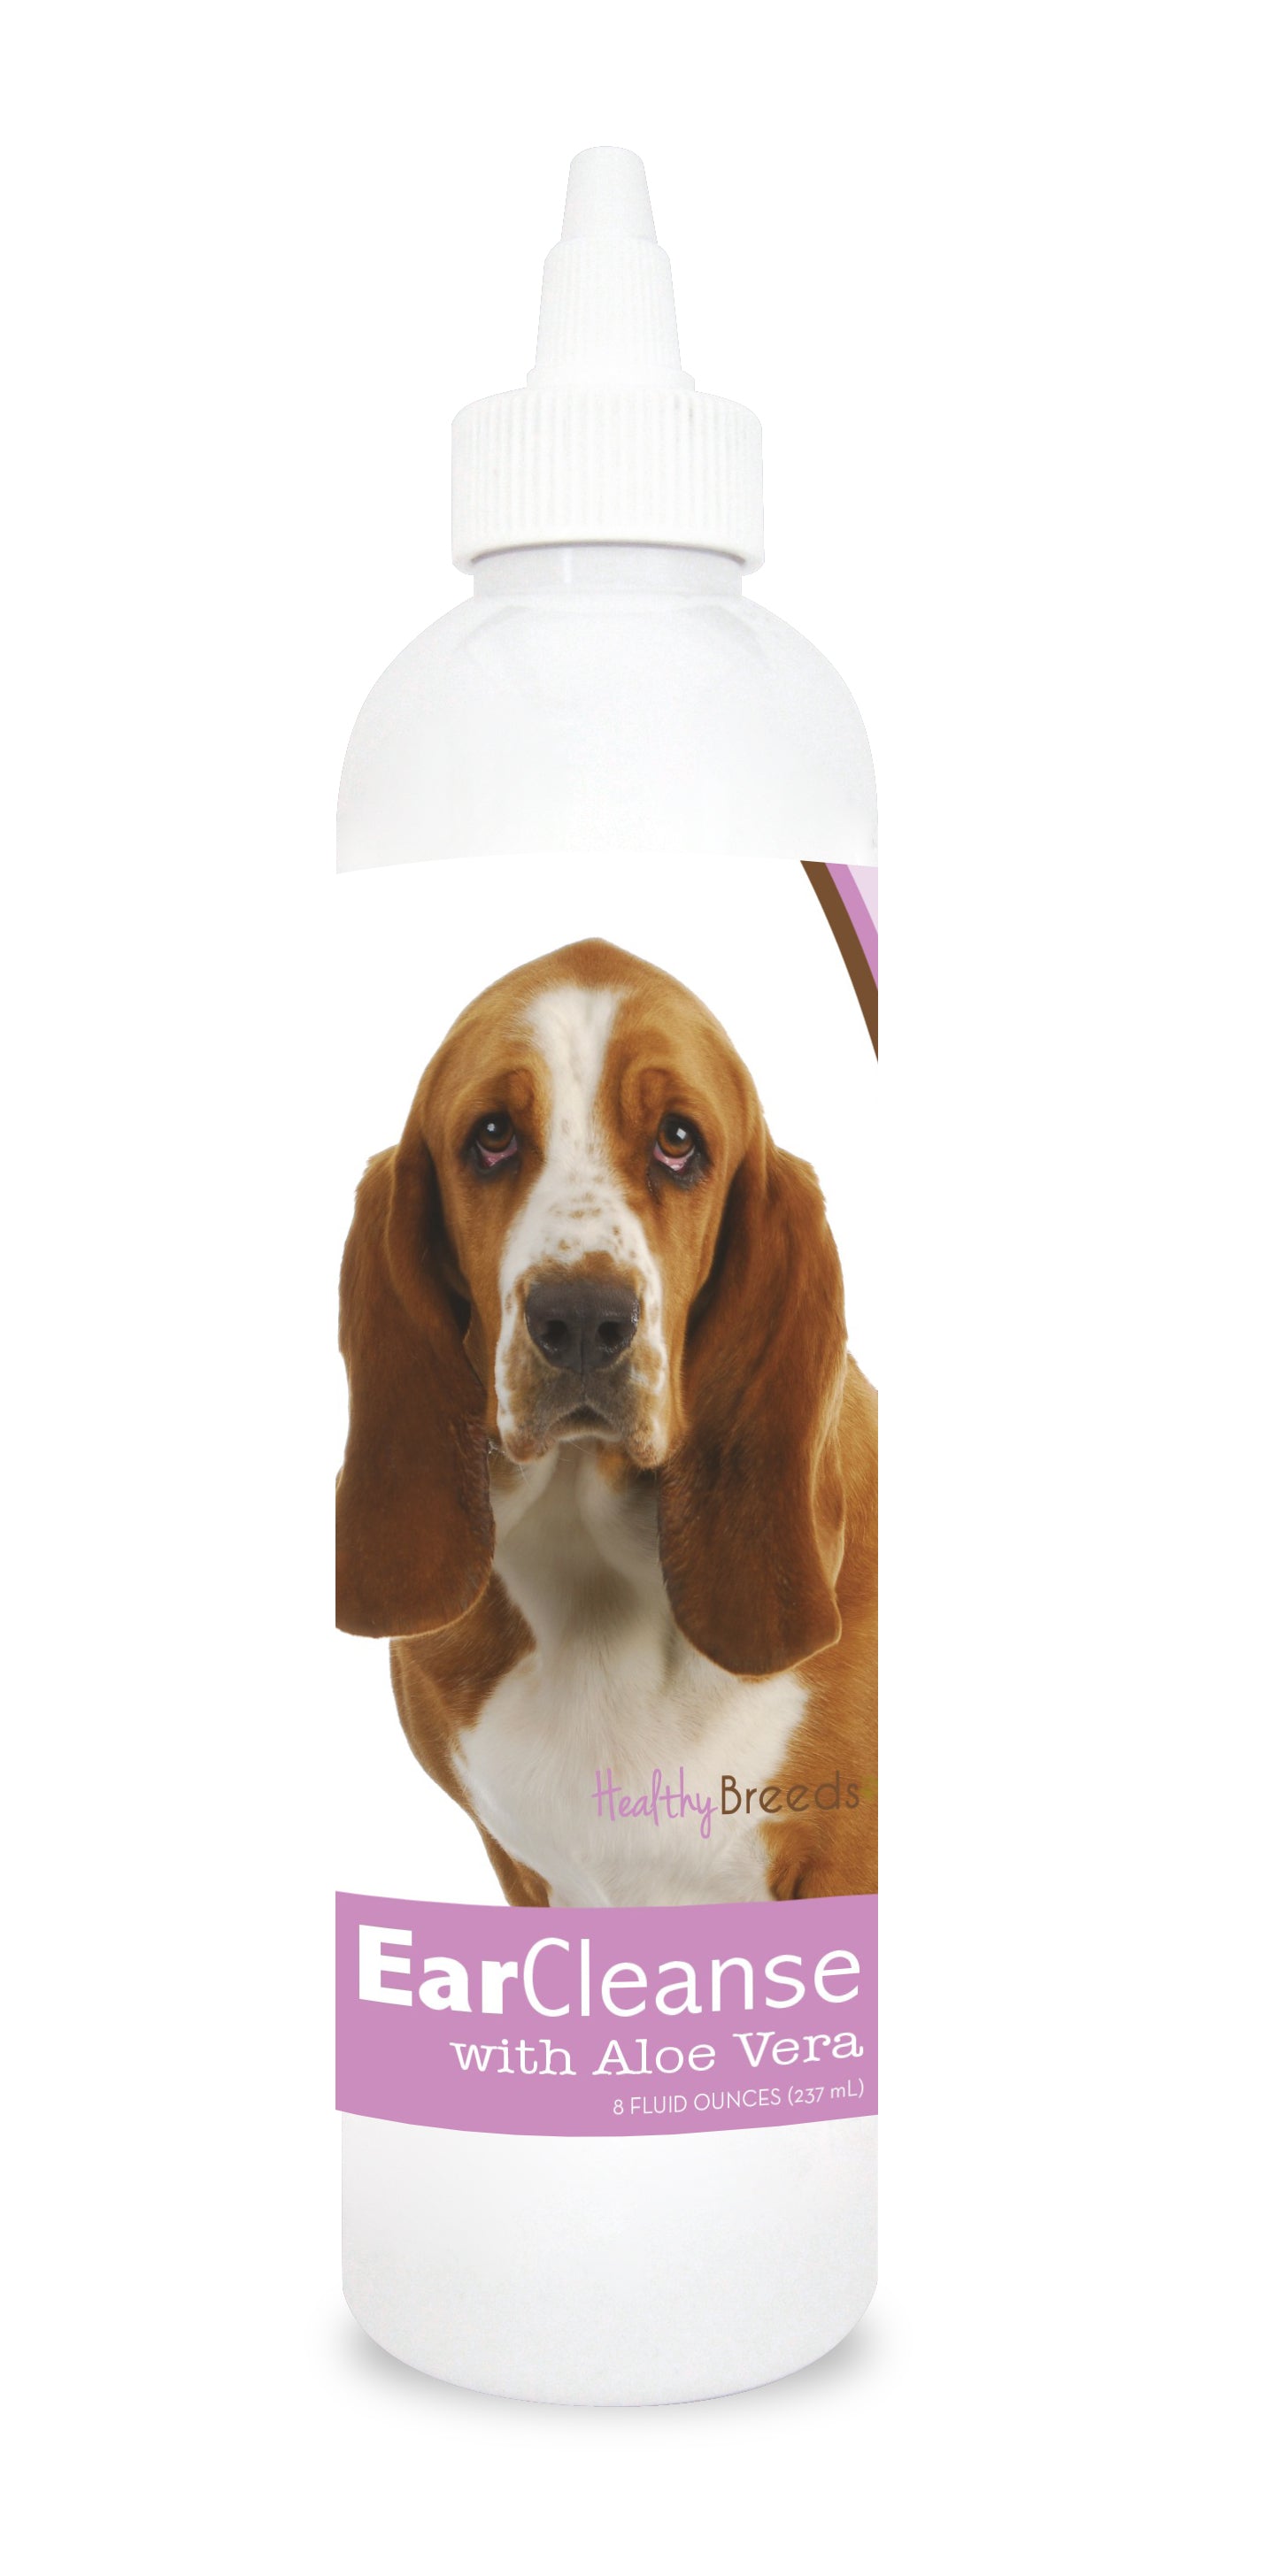 Basset Hound Ear Cleanse with Aloe Vera Sweet Pea and Vanilla 8 oz